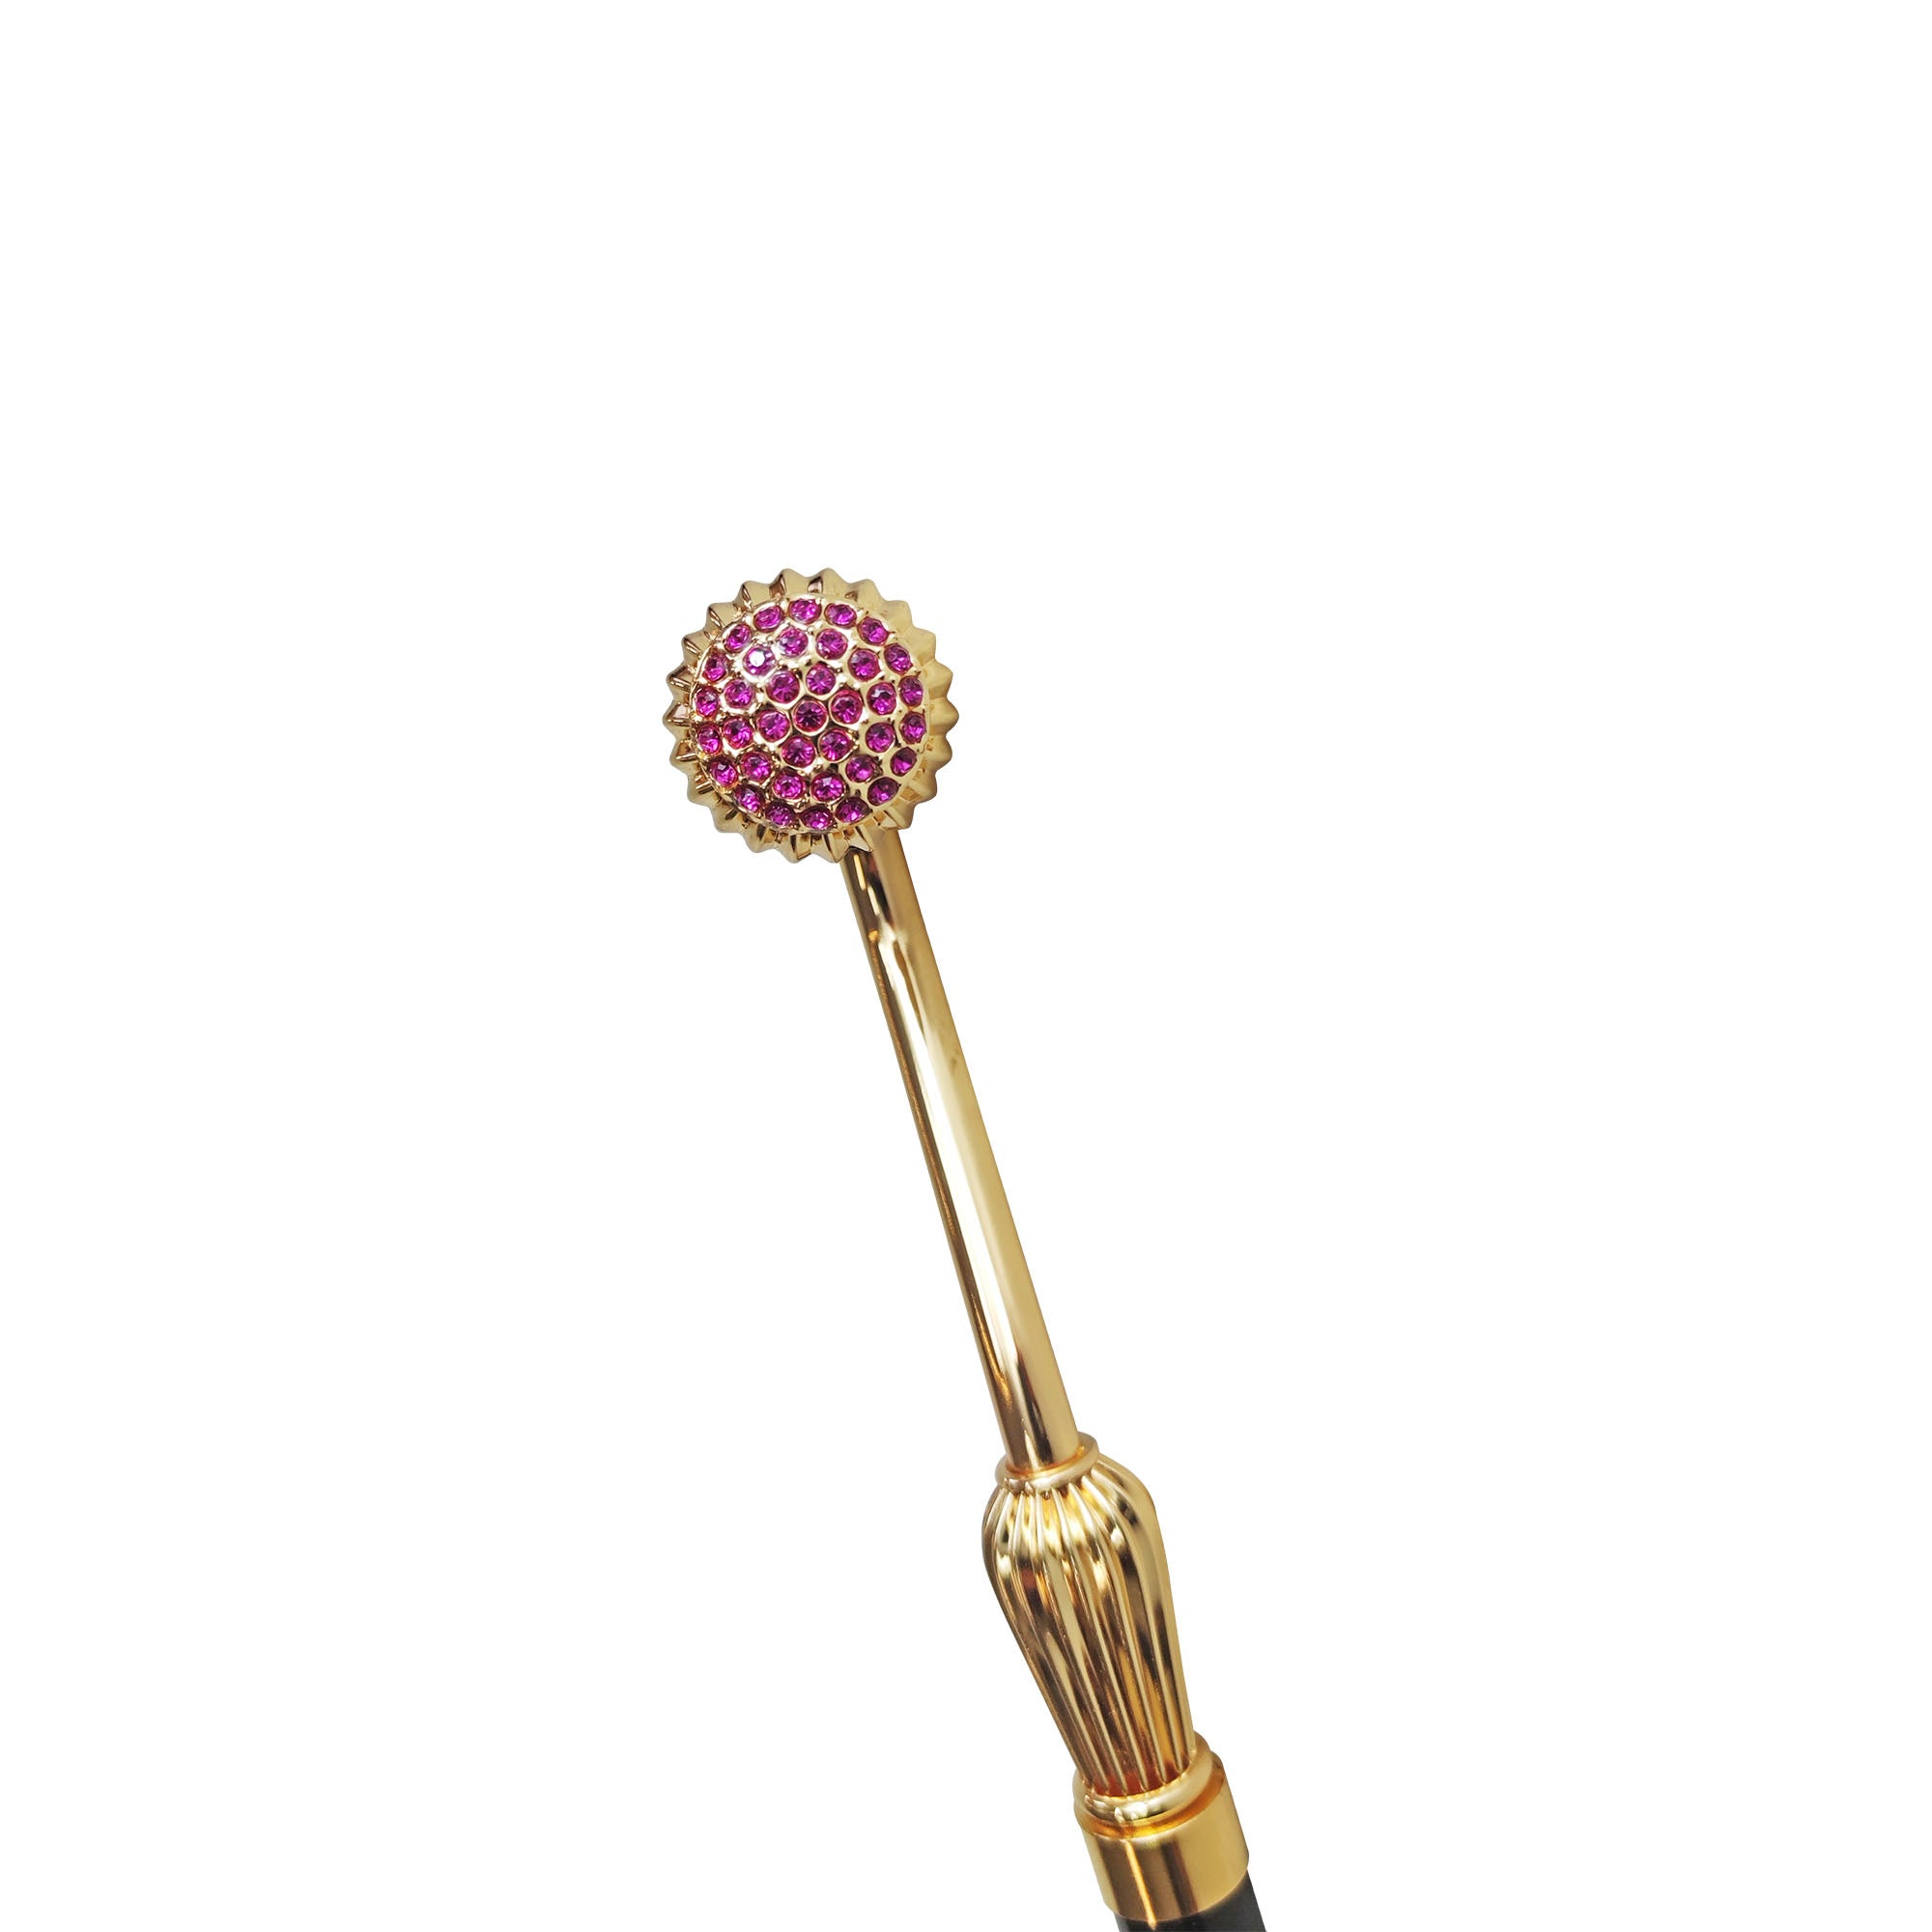 Ladies Walking stick with amethyst crystals